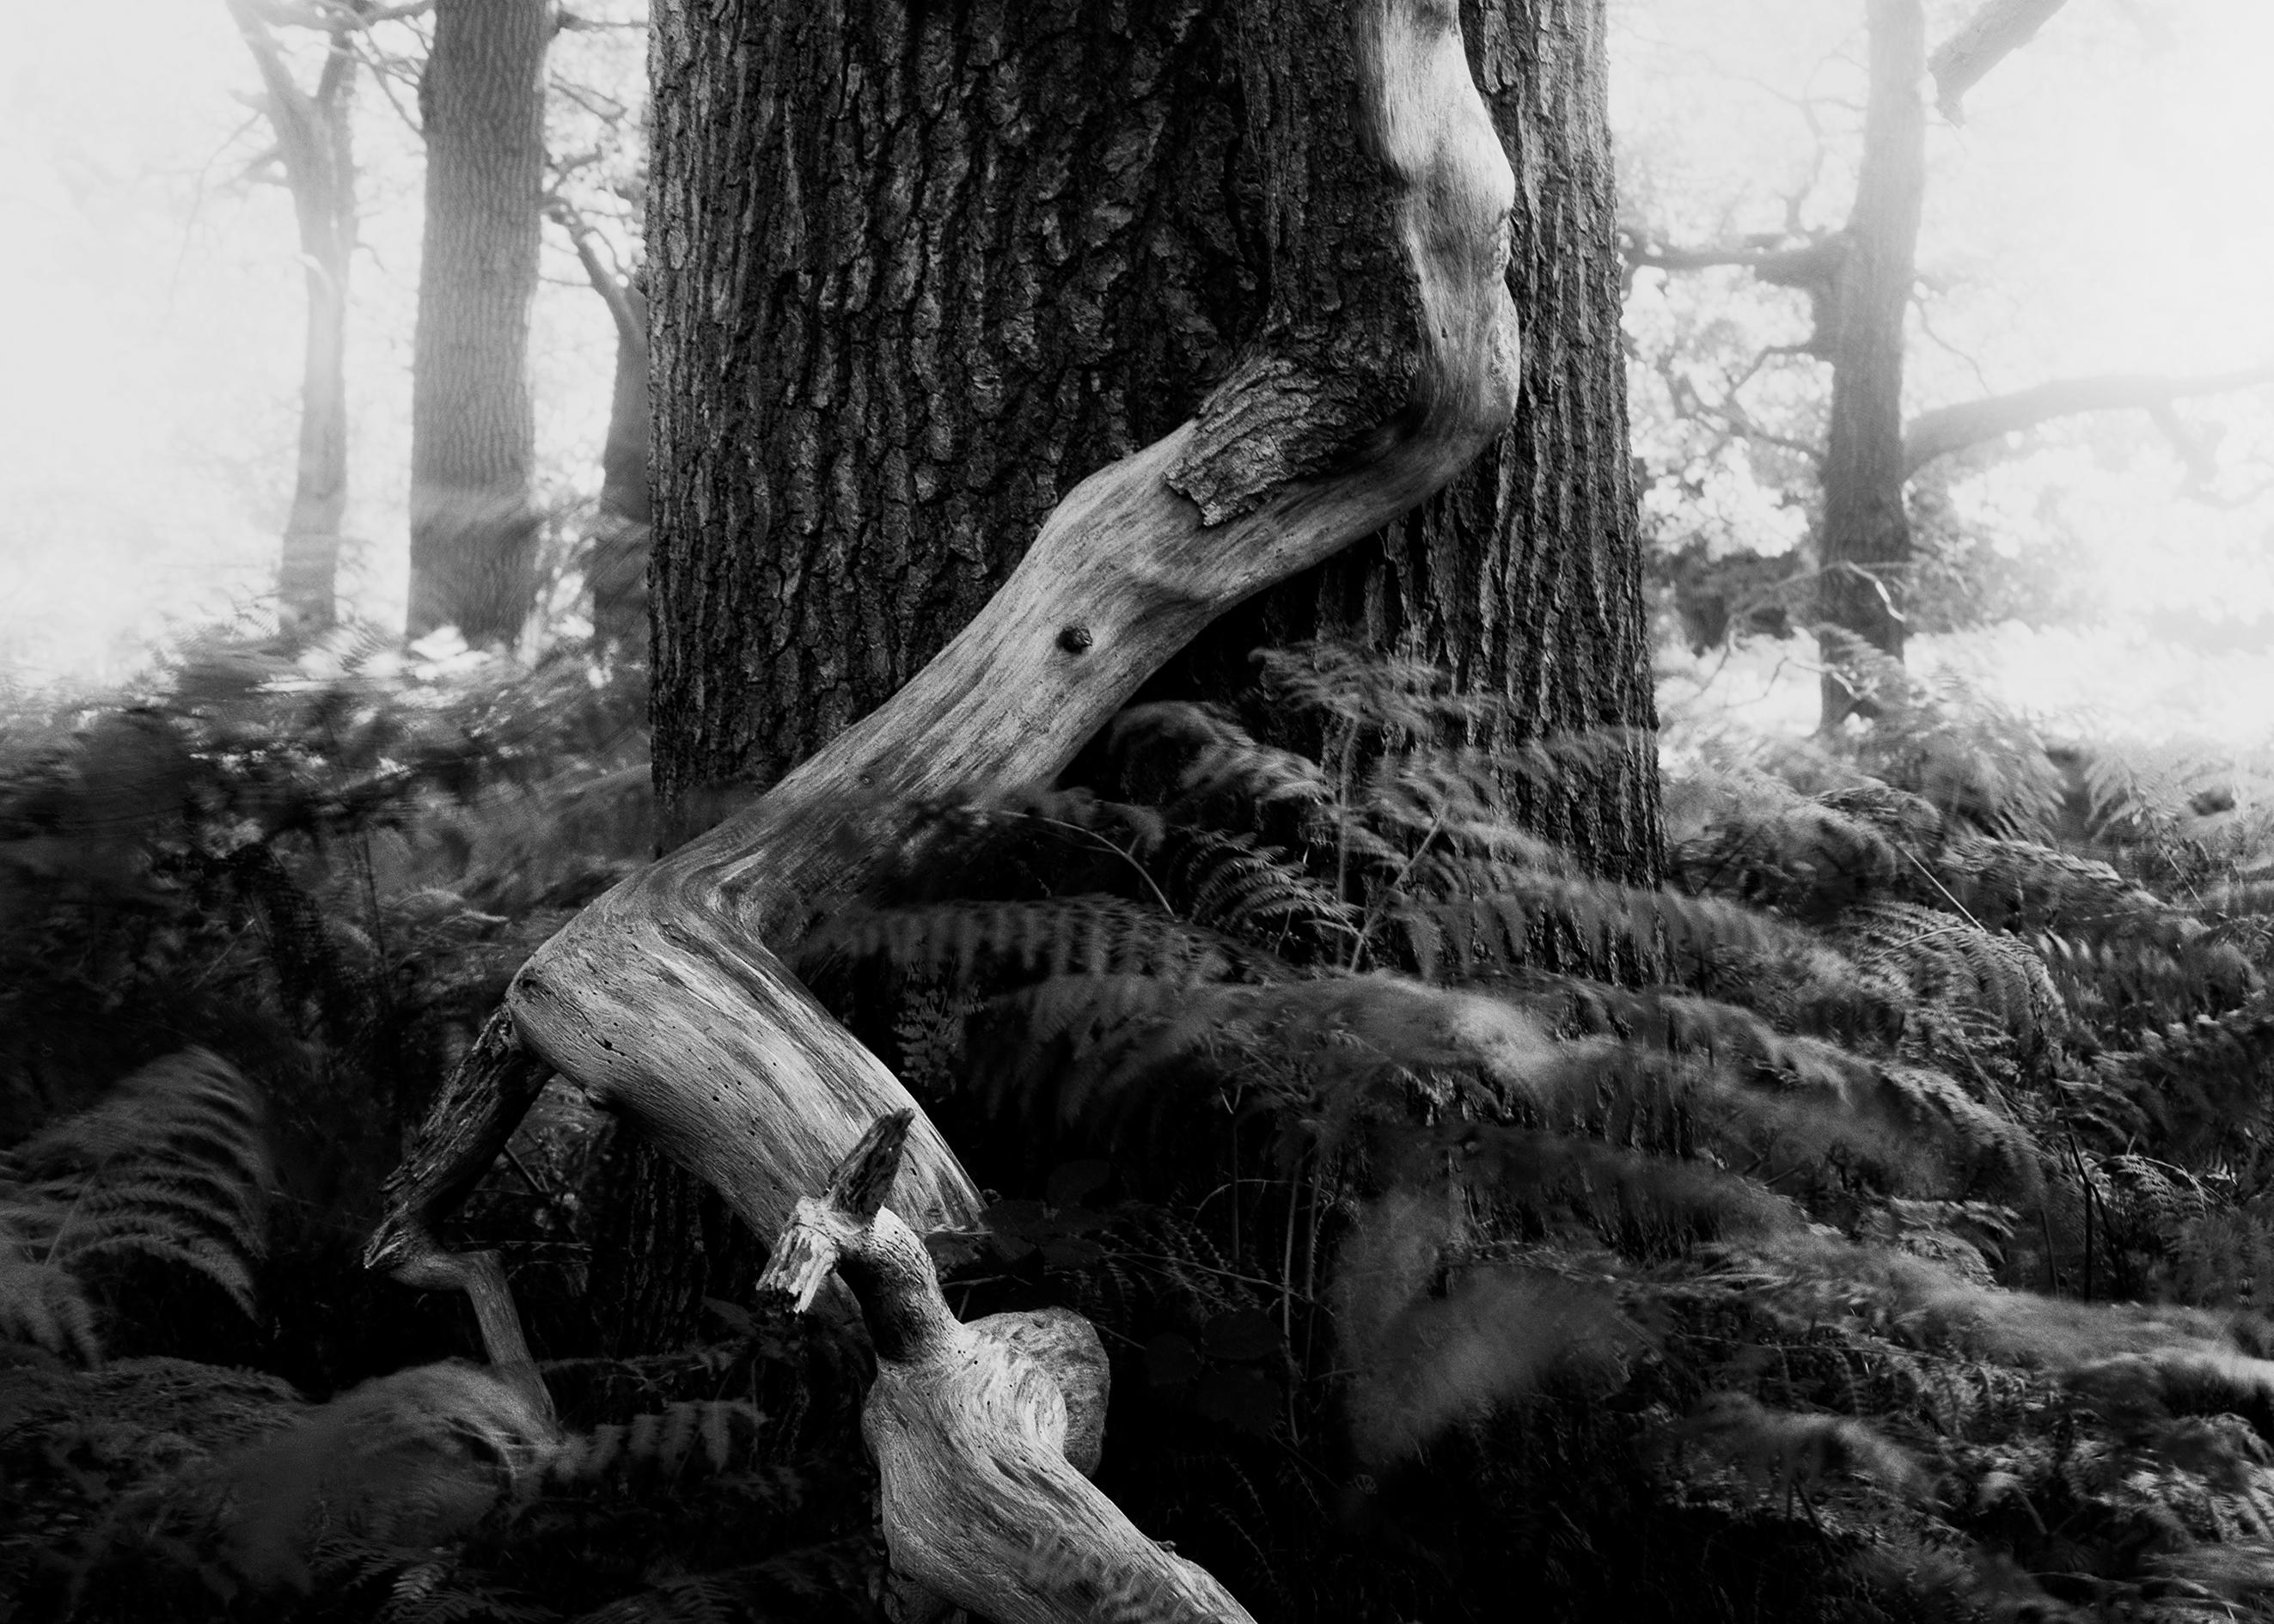 Ugne Pouwell Landscape Photograph - Fallen - analogue black and white woodland photography, limited edition of 20